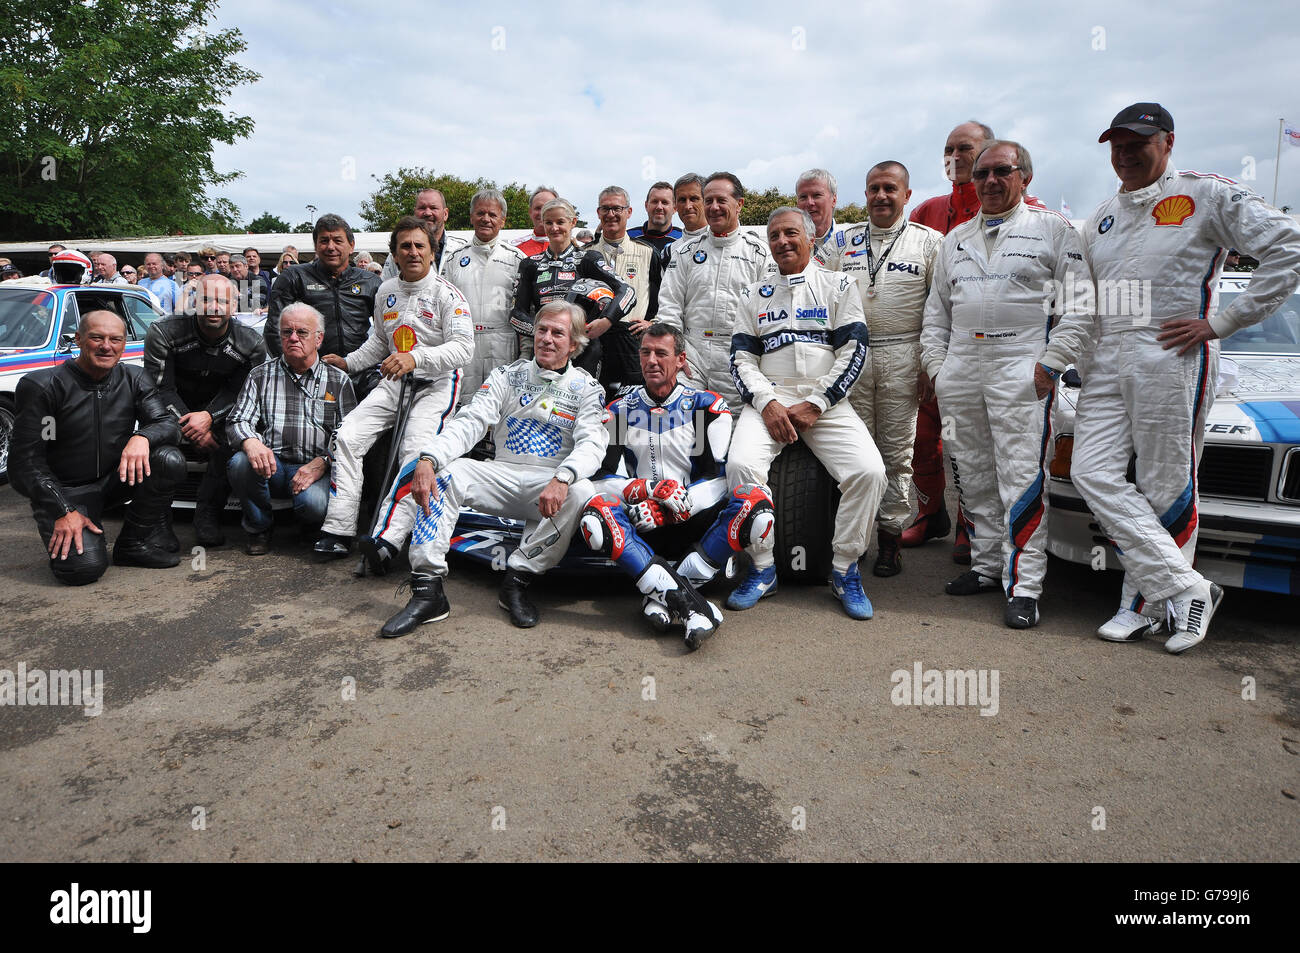 BMW drivers and riders at Goodwood Festival of Speed 2016. Celebration of BMW motorsport history Stock Photo